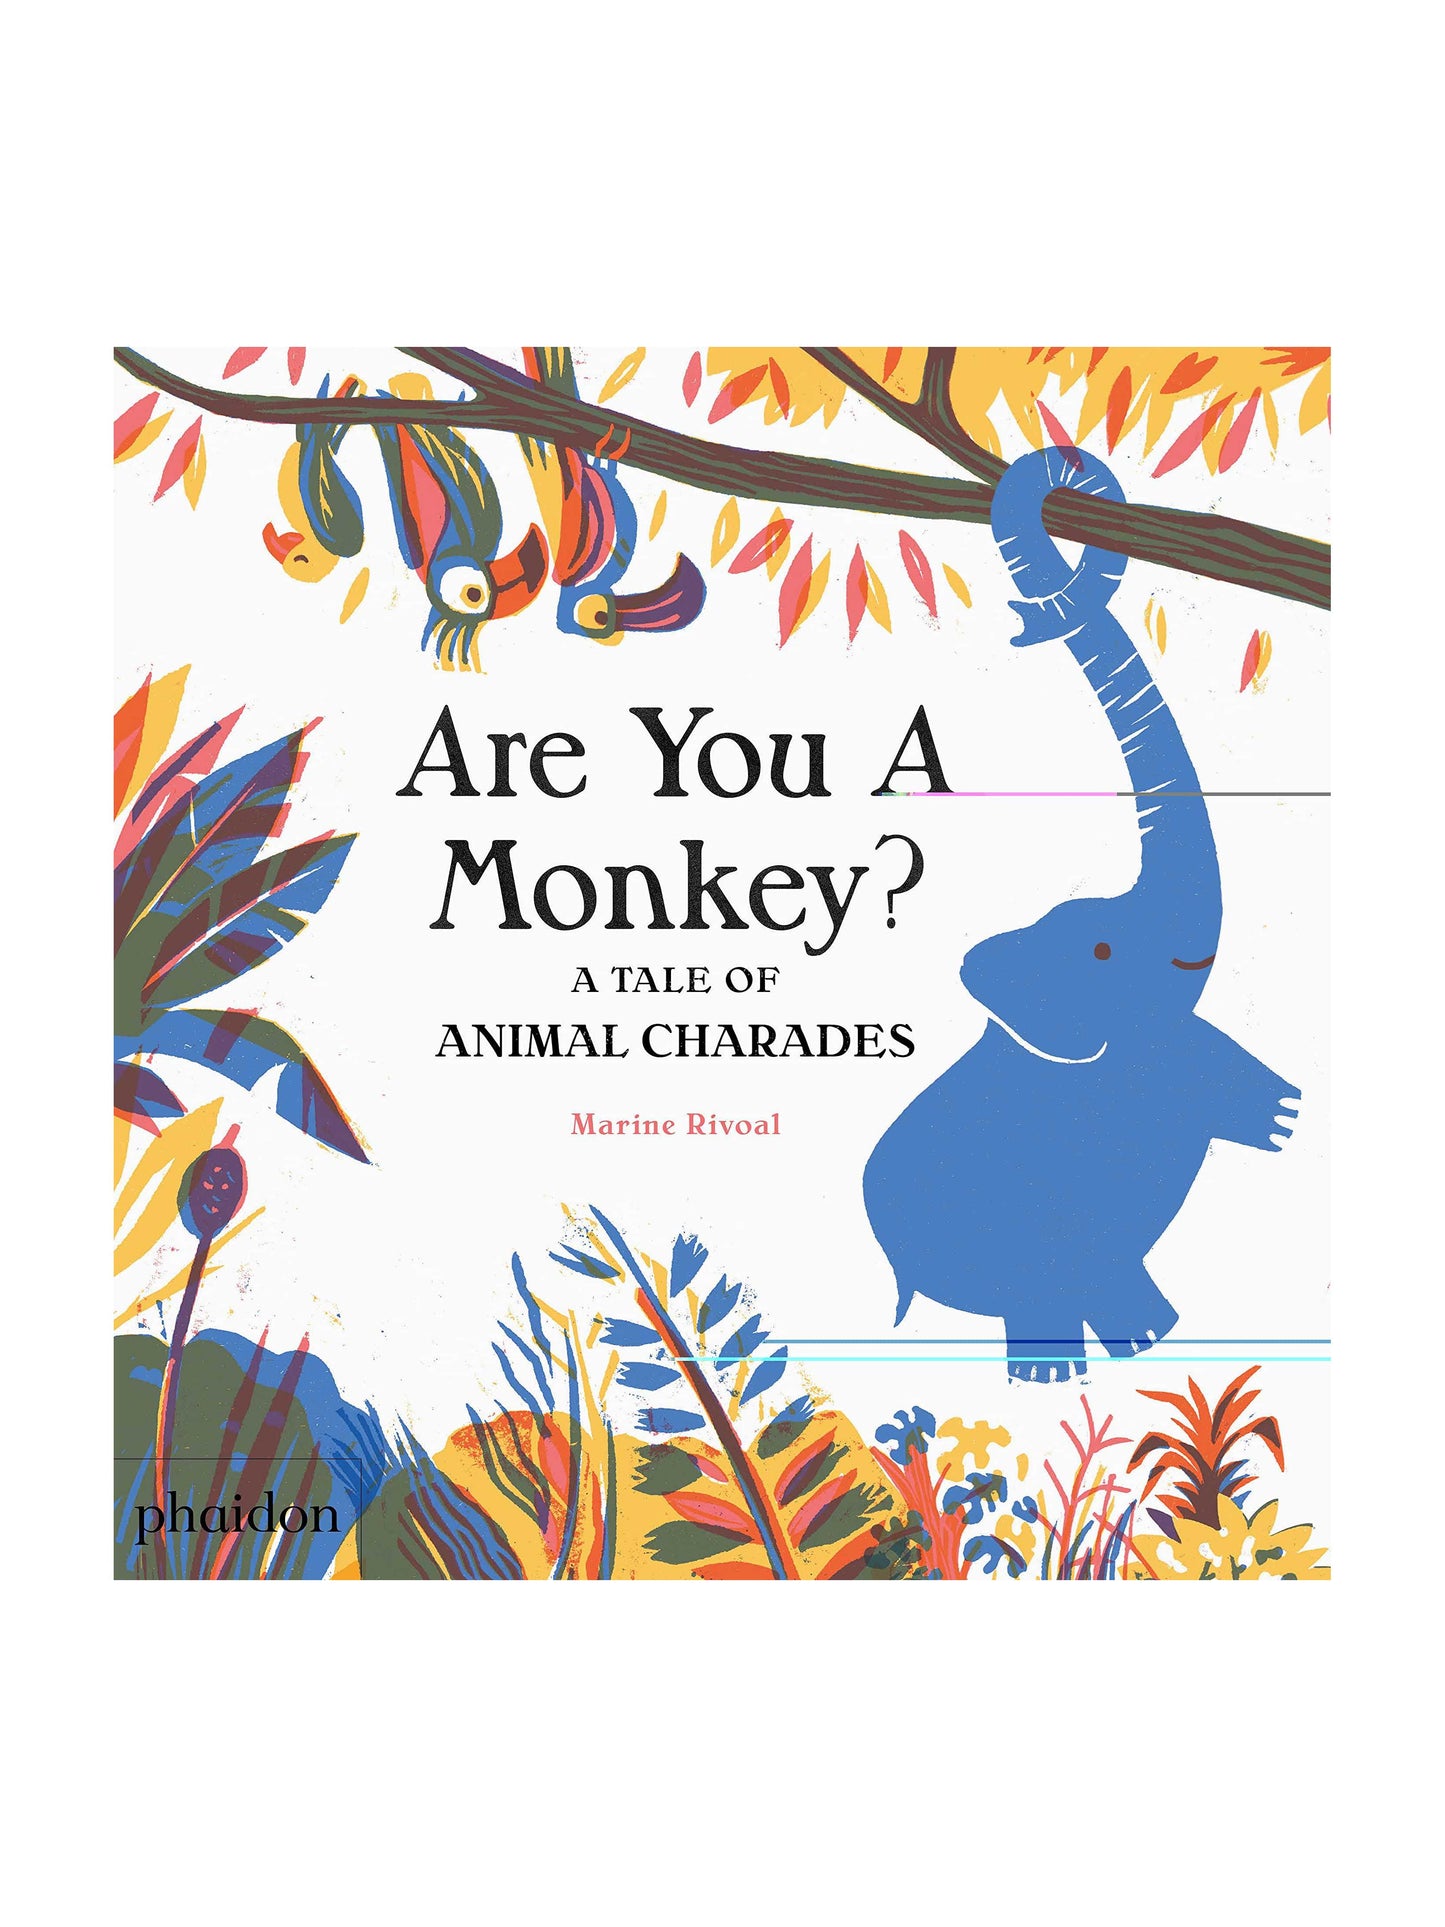 Are You A Monkey? A Tail of Animal Charades